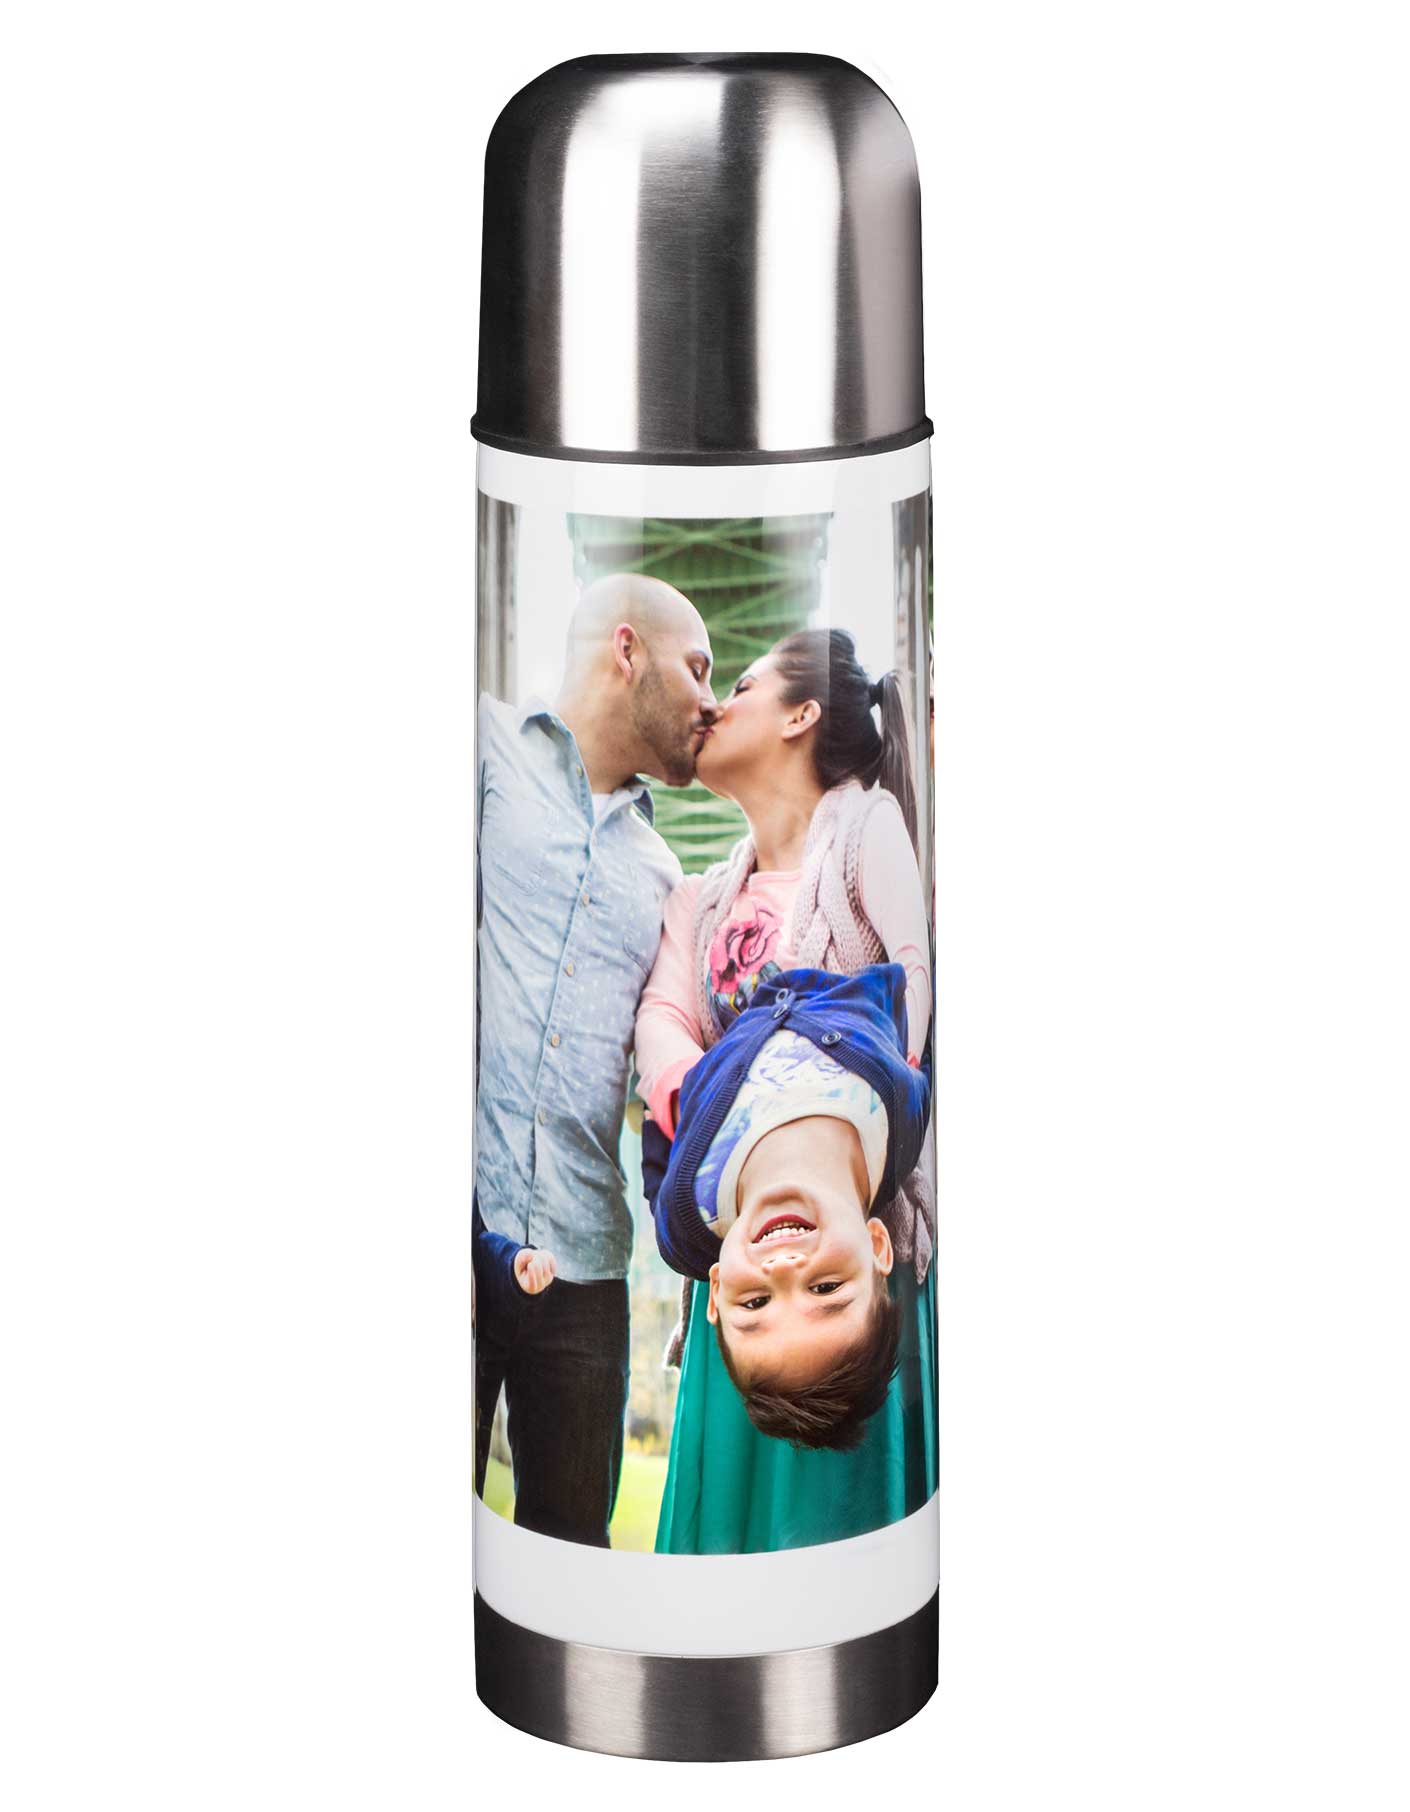 https://www.goodprints.com/wp-content/uploads/2019/09/white-photo-thermos-with-custom-print.jpg